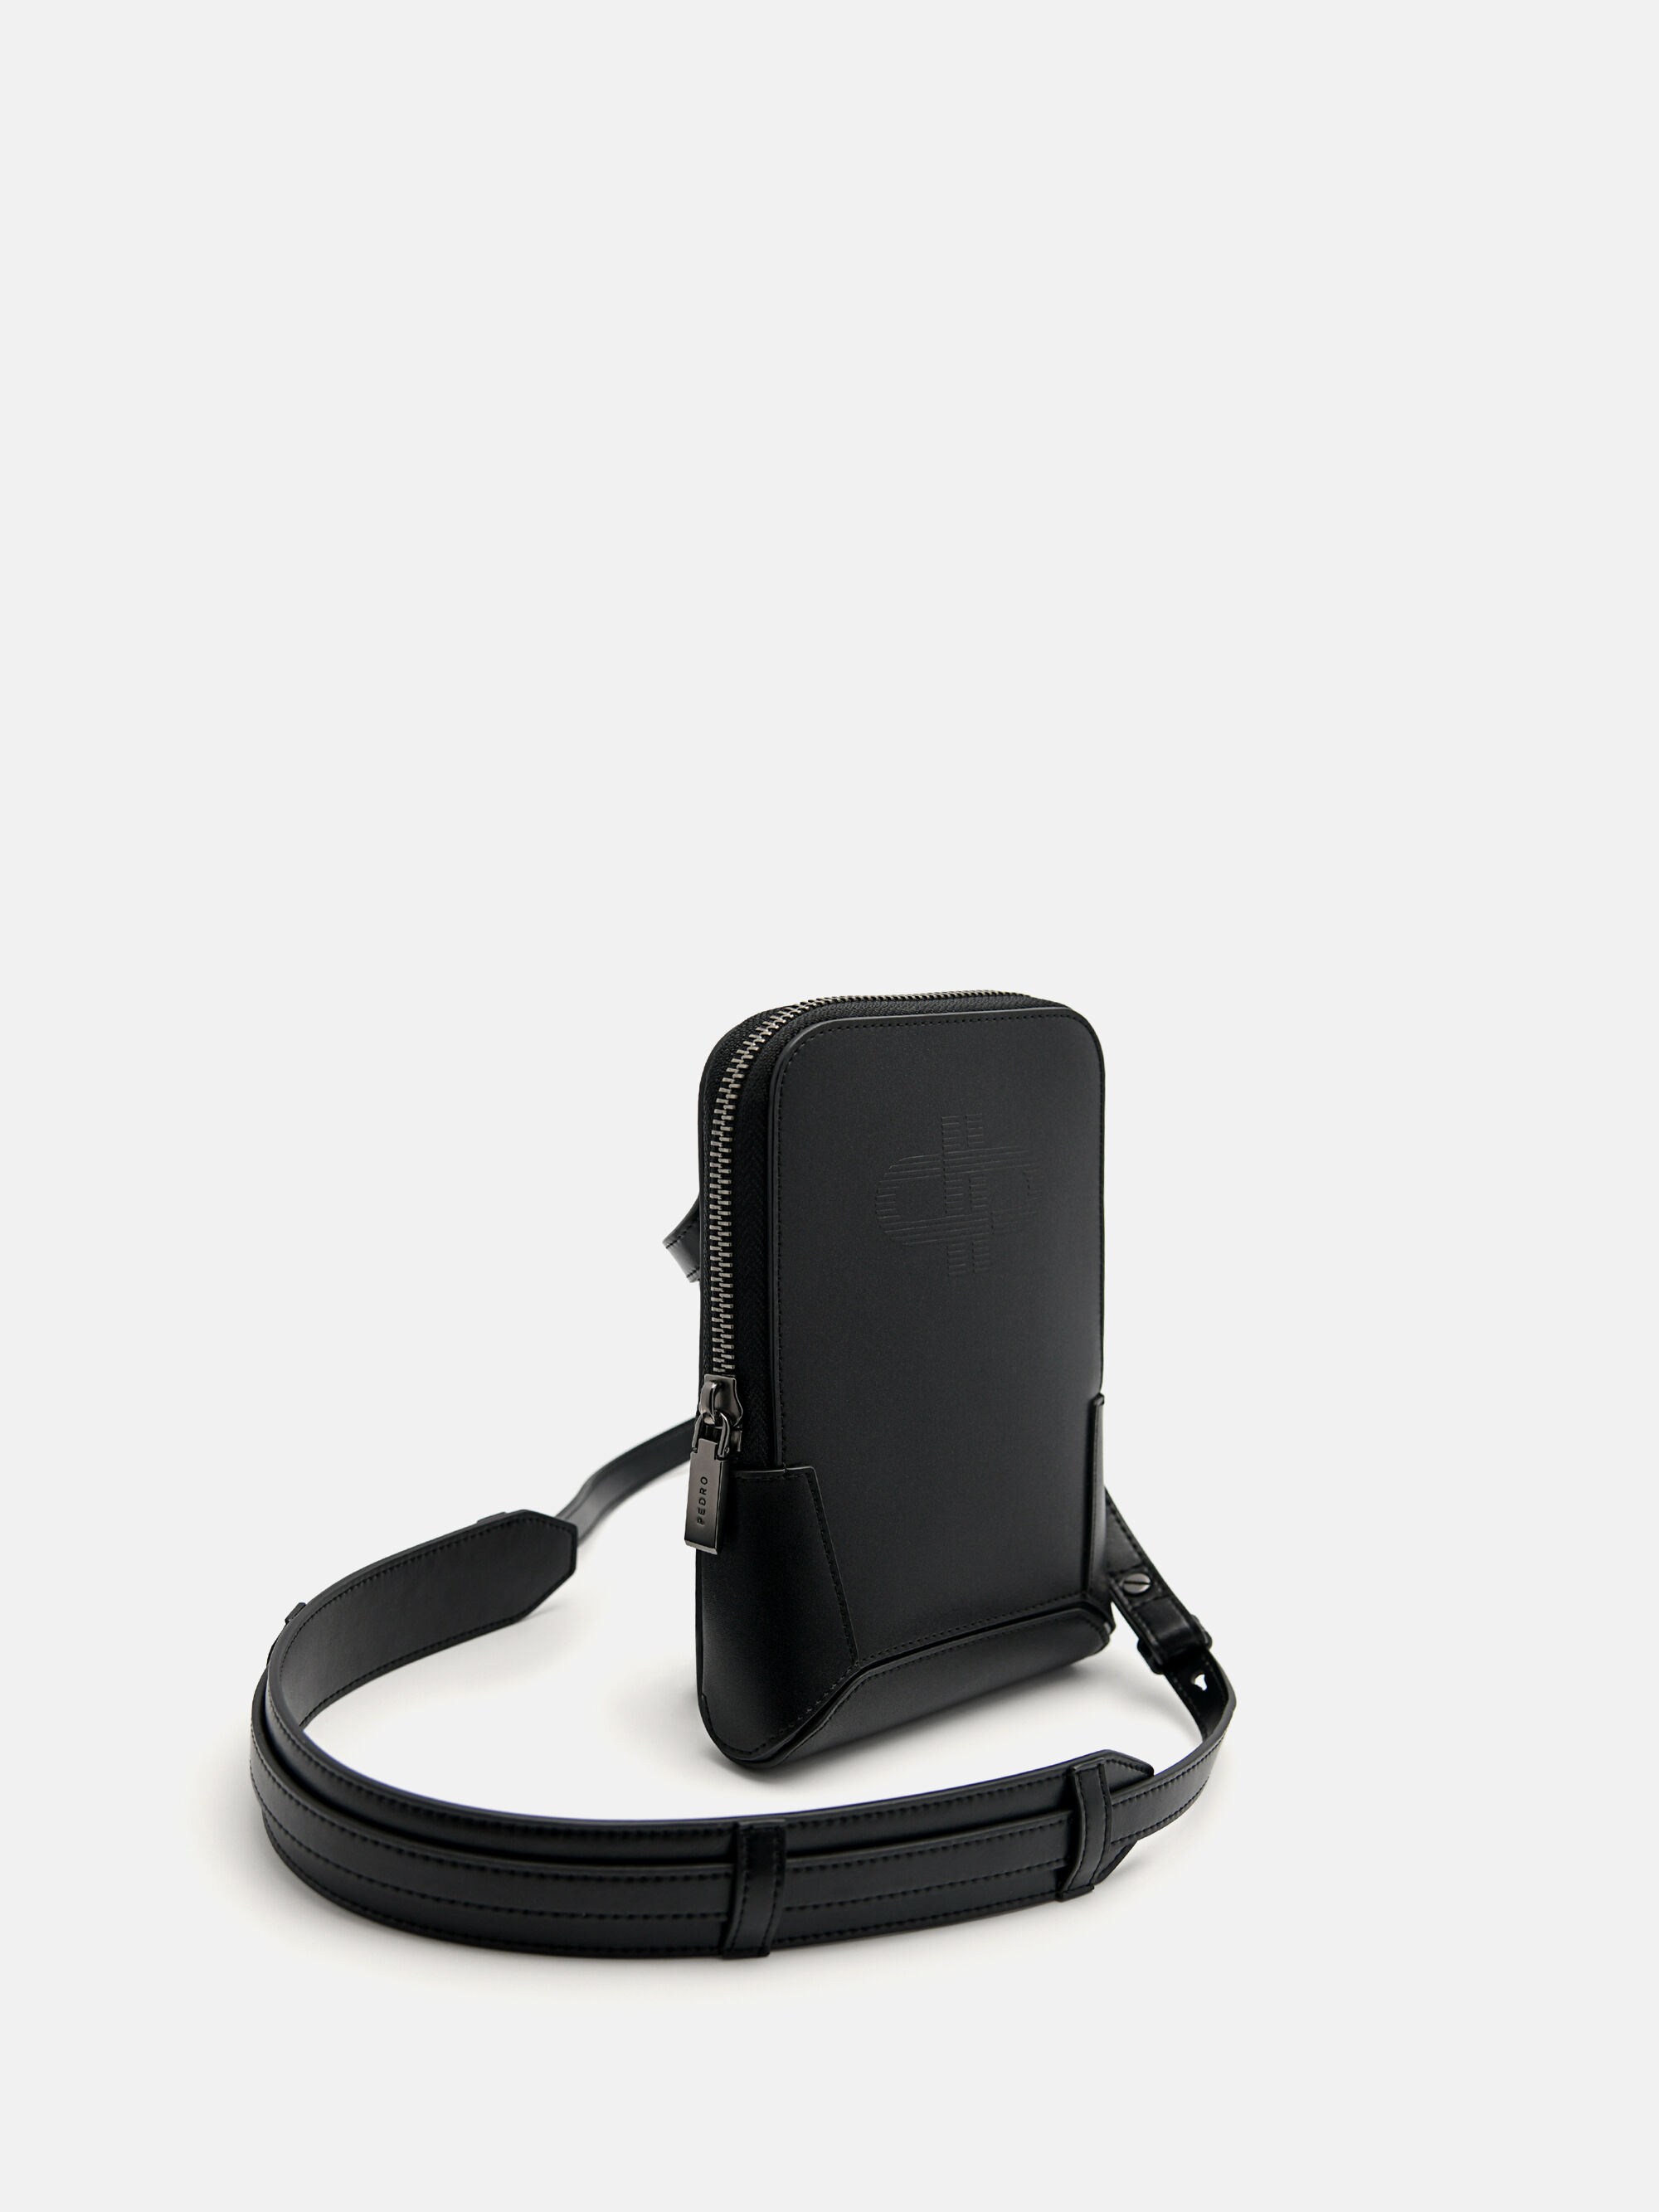 Black Leather Mobile Phone Sling Pouch - PEDRO US